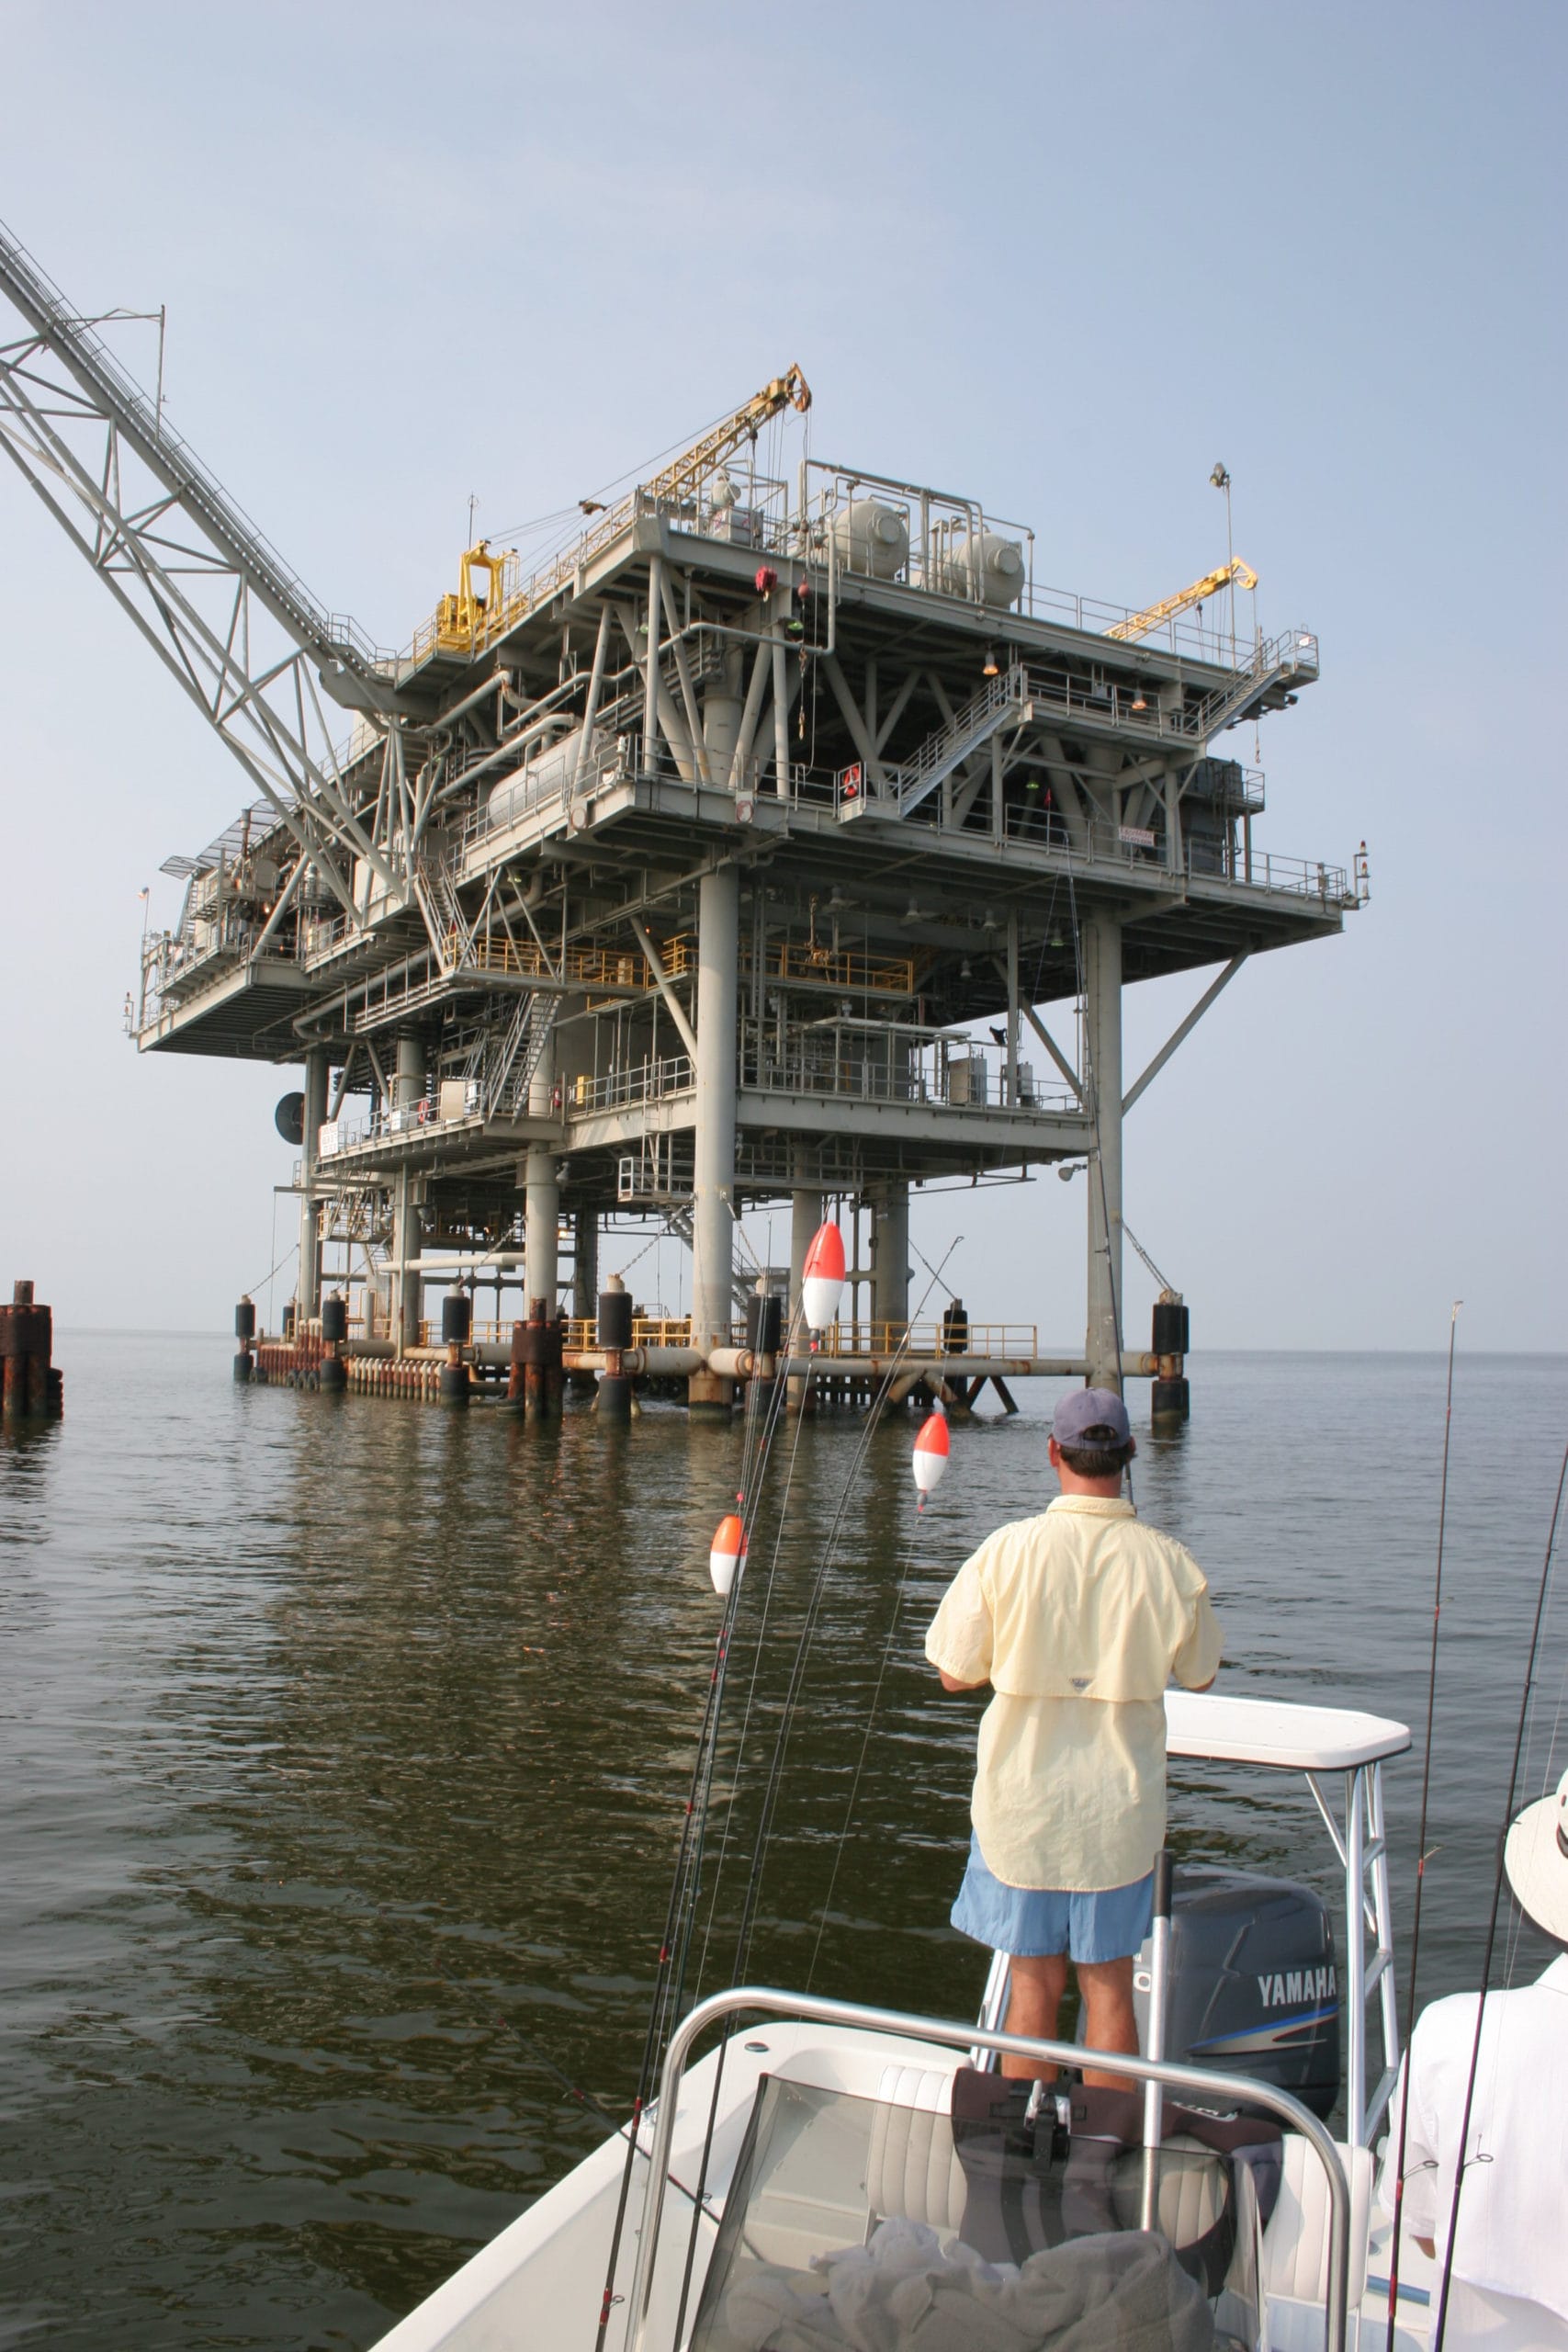 Oil-rig platforms are great fishing spots in the Mobile Bay area of coastal Alabama.